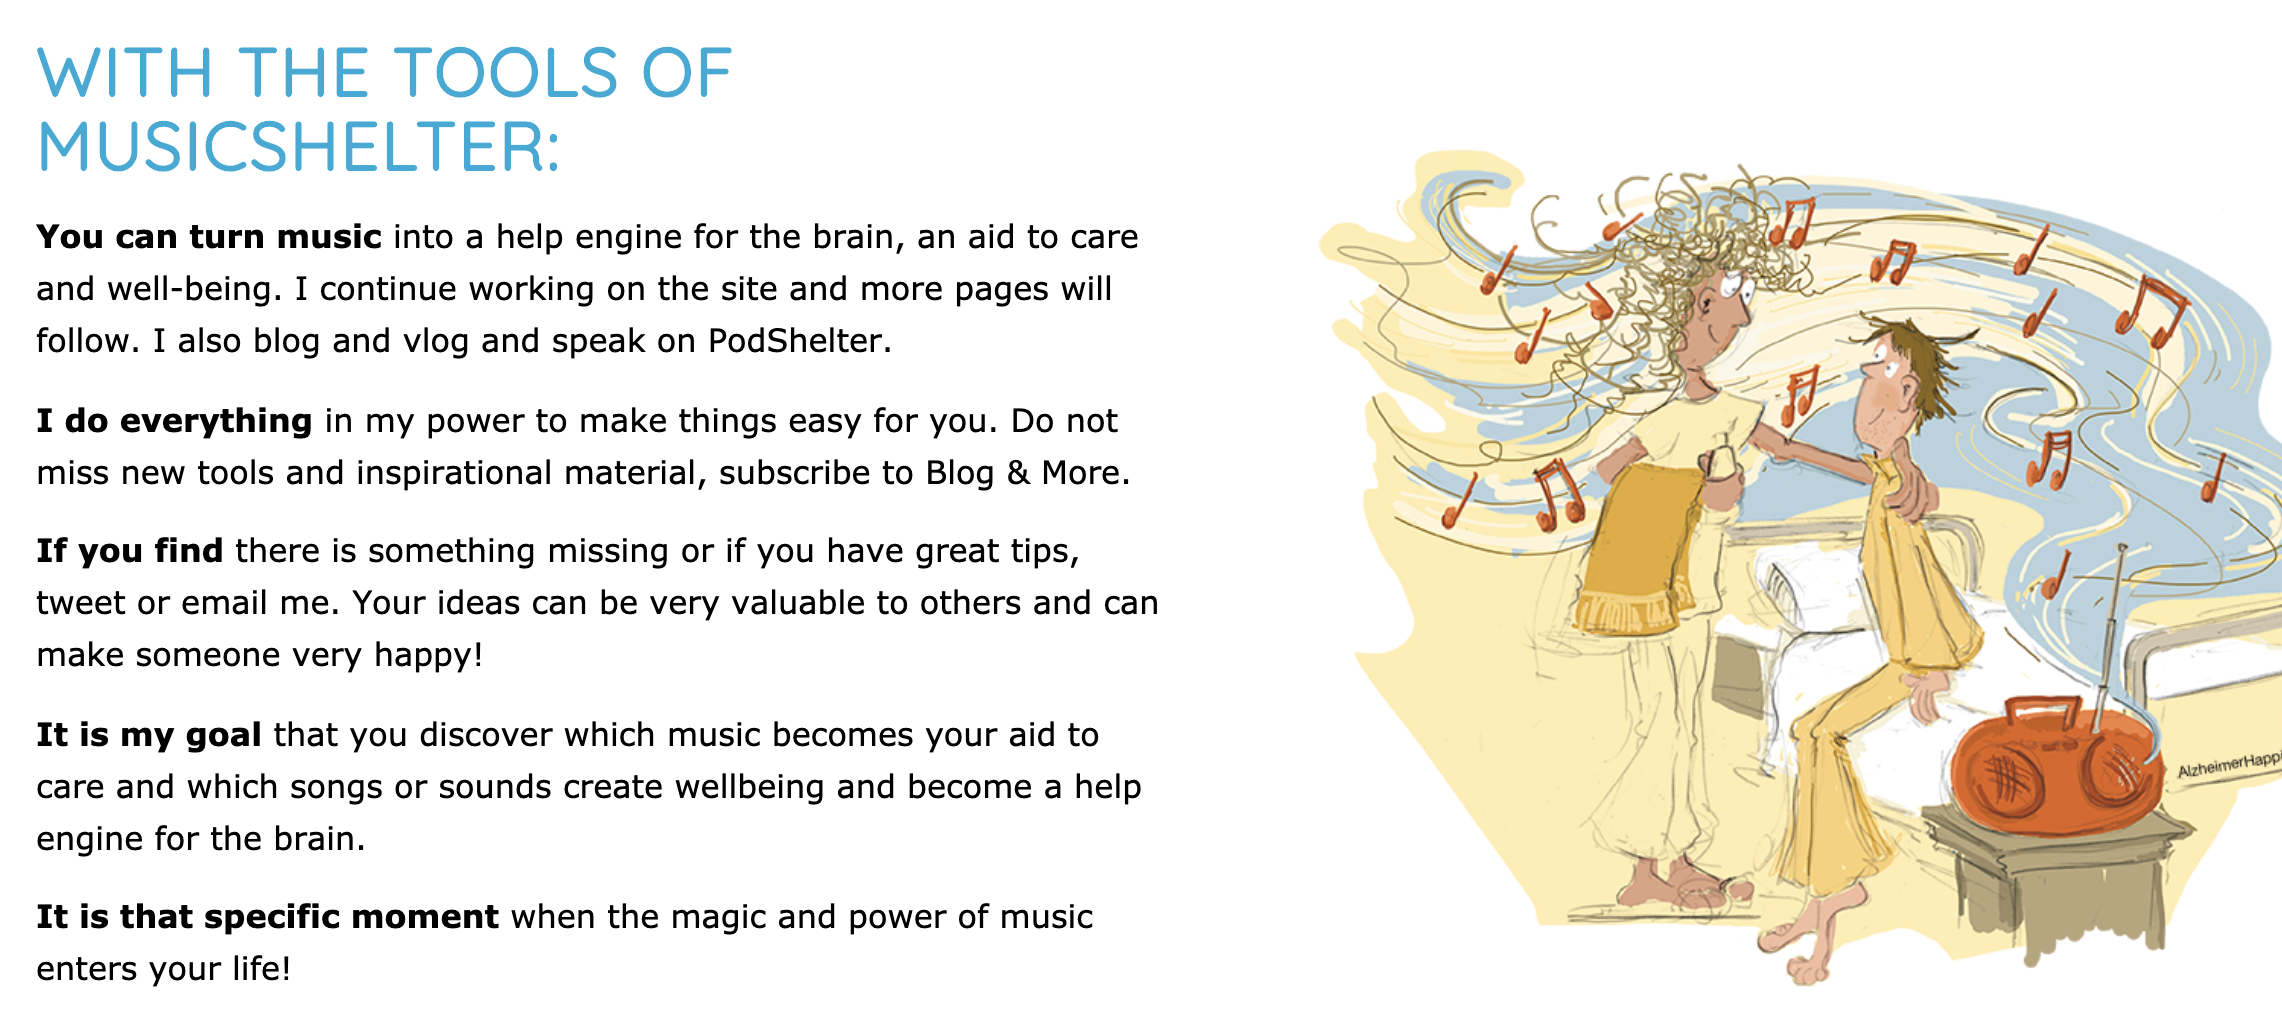 MusicShelter - your new go to resource on the thereuptic use of music in care settings featured image